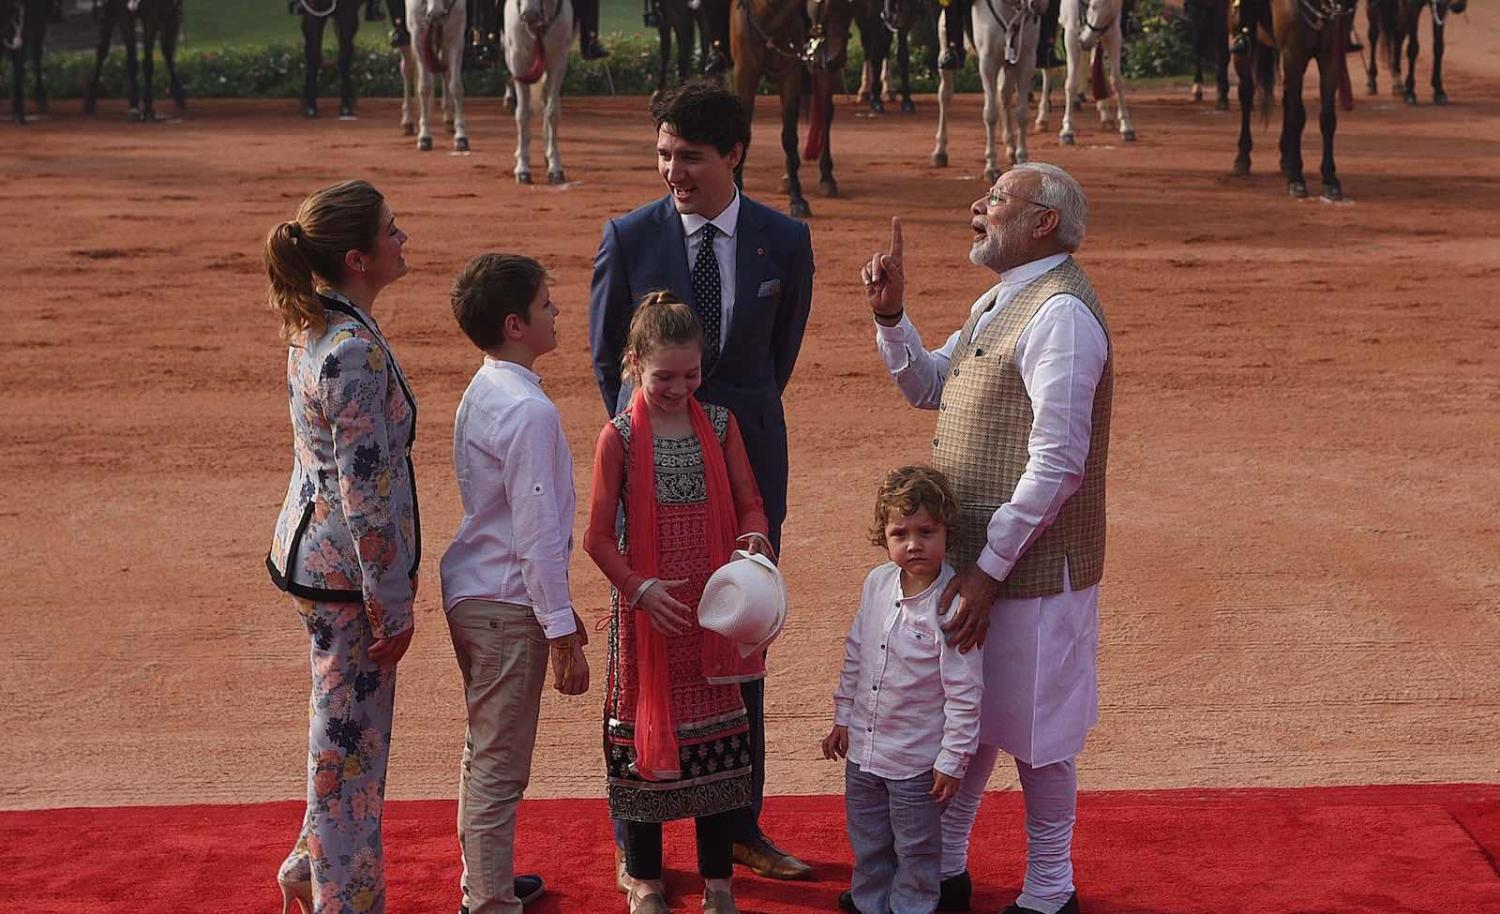 Indian Prime Minister Narendra Modi (right) welcoming Canadian Prime Minister Justin Trudeau and his family in New Delhi, 23 February 2018 (Vipin Kumar/Hindustan Times via Getty Images)